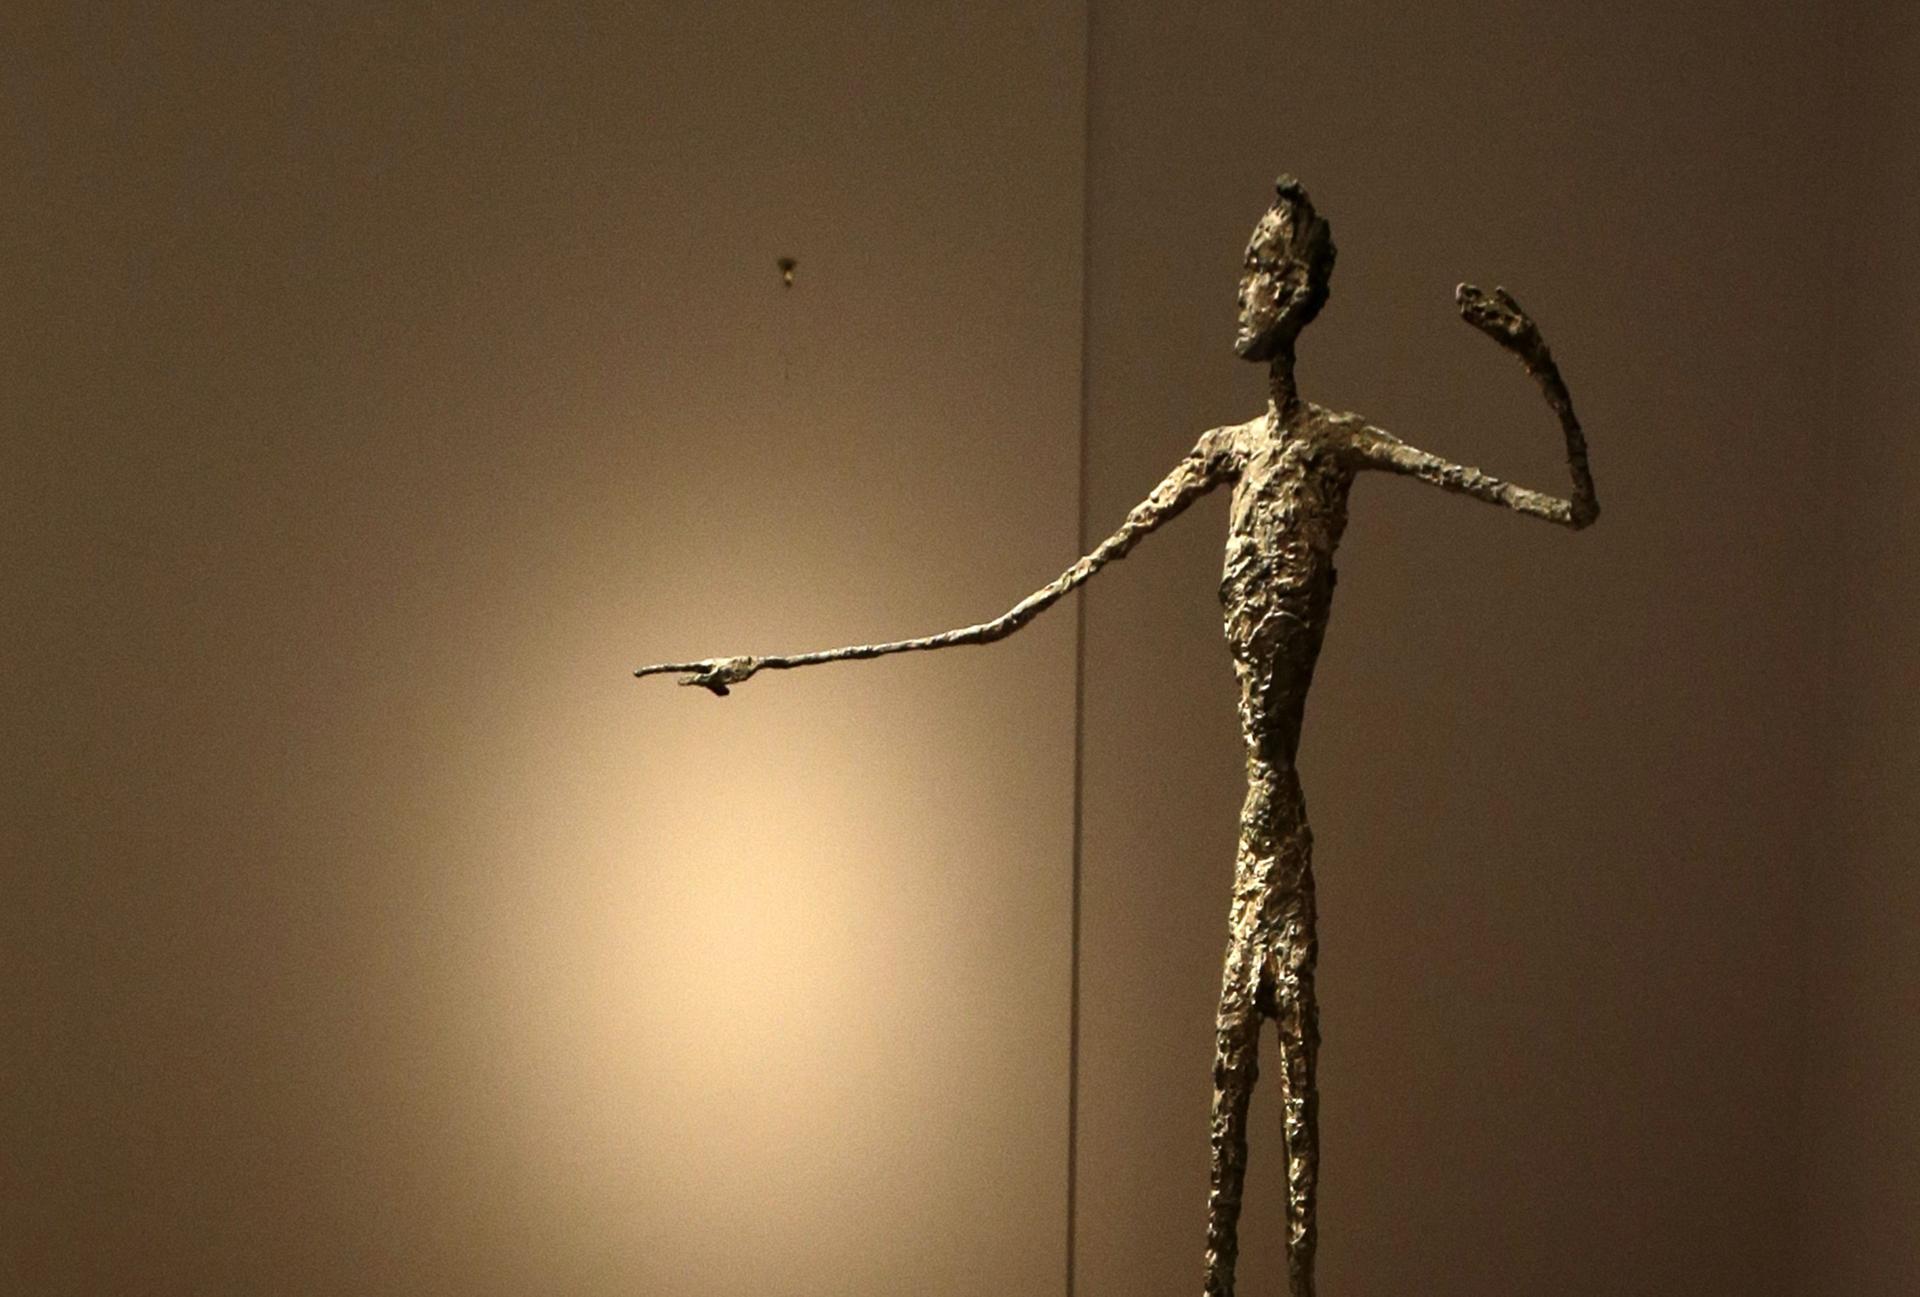 Most Expensive Sculpture: “L’homme au doigt”, Alberto Giacometti.
Price: $141,300,000.